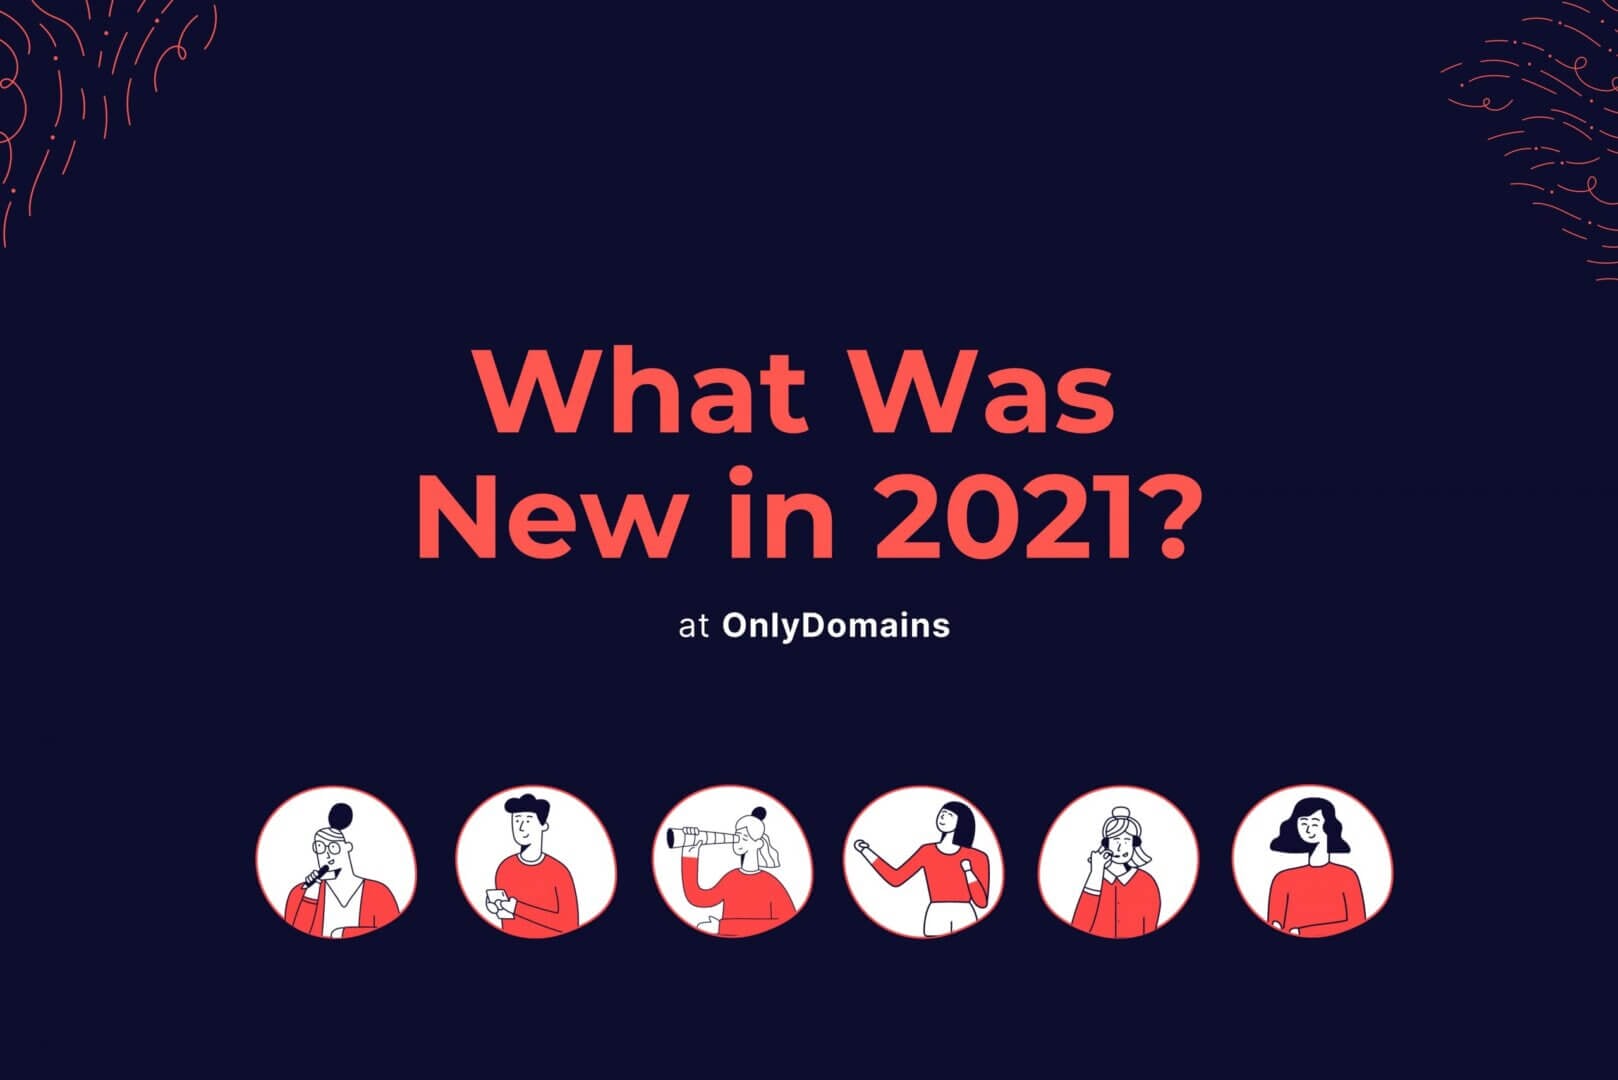 What Was New in 2021?